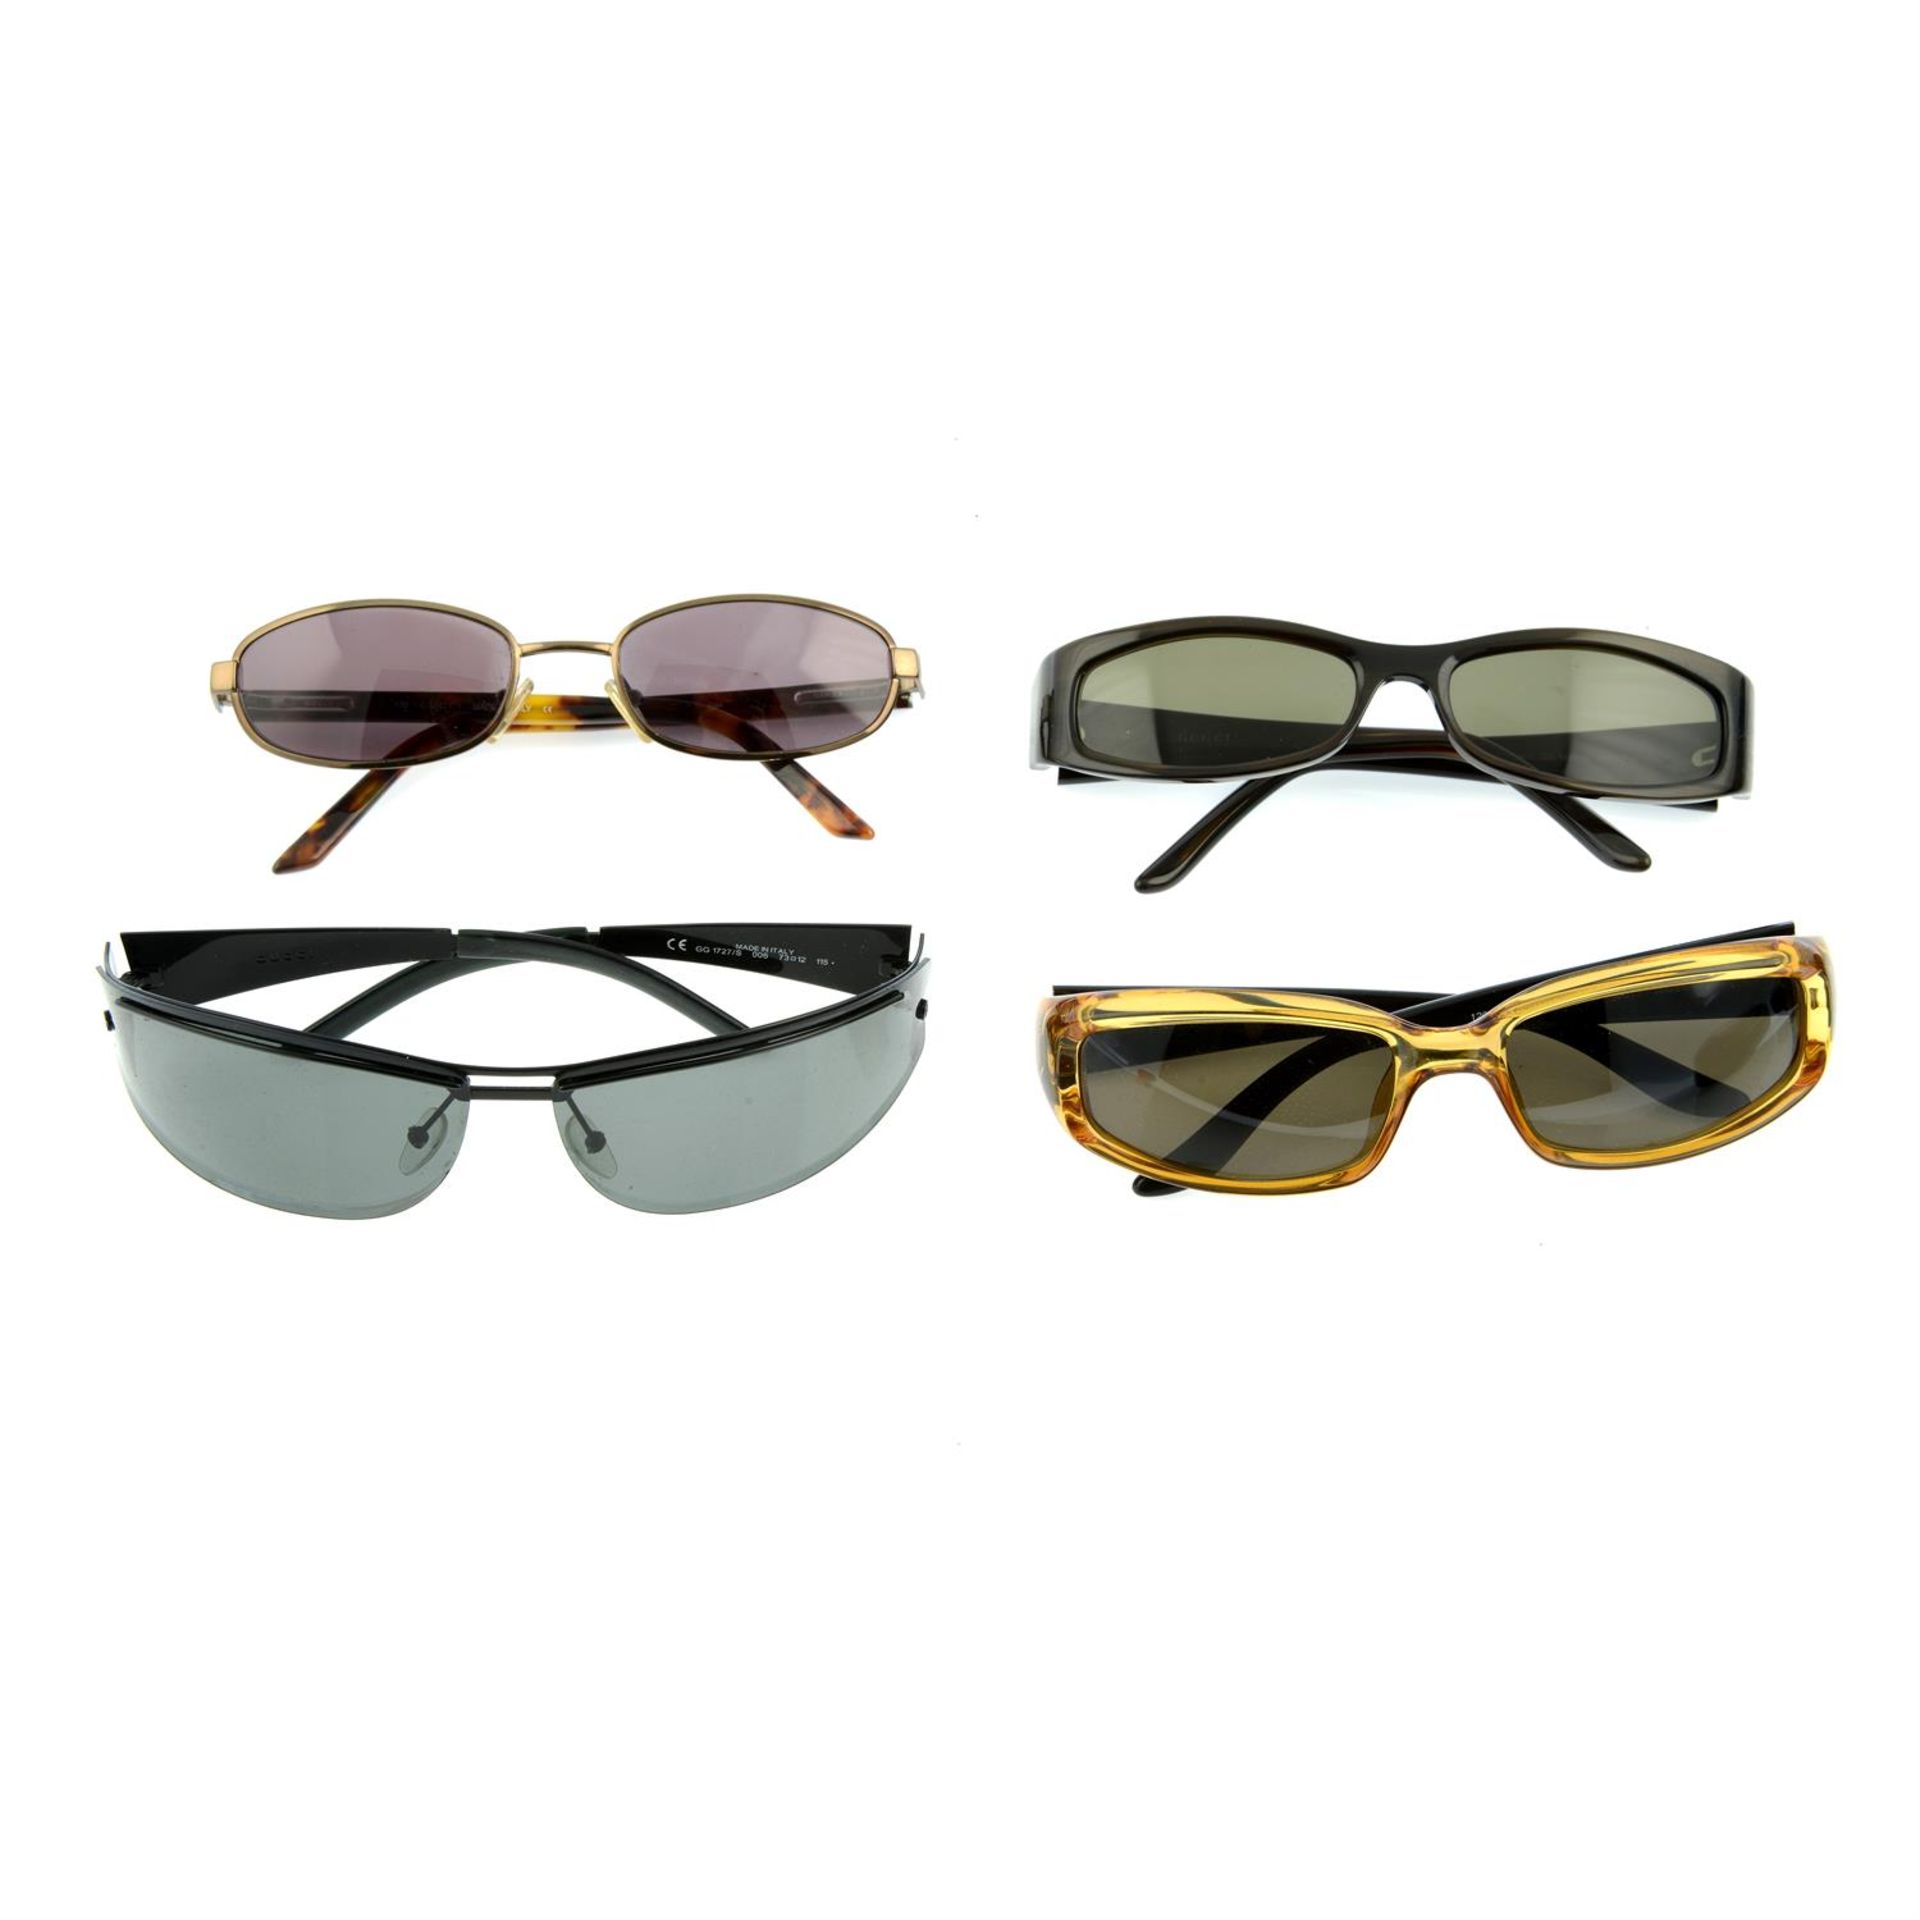 GUCCI - four pairs of sunglasses.